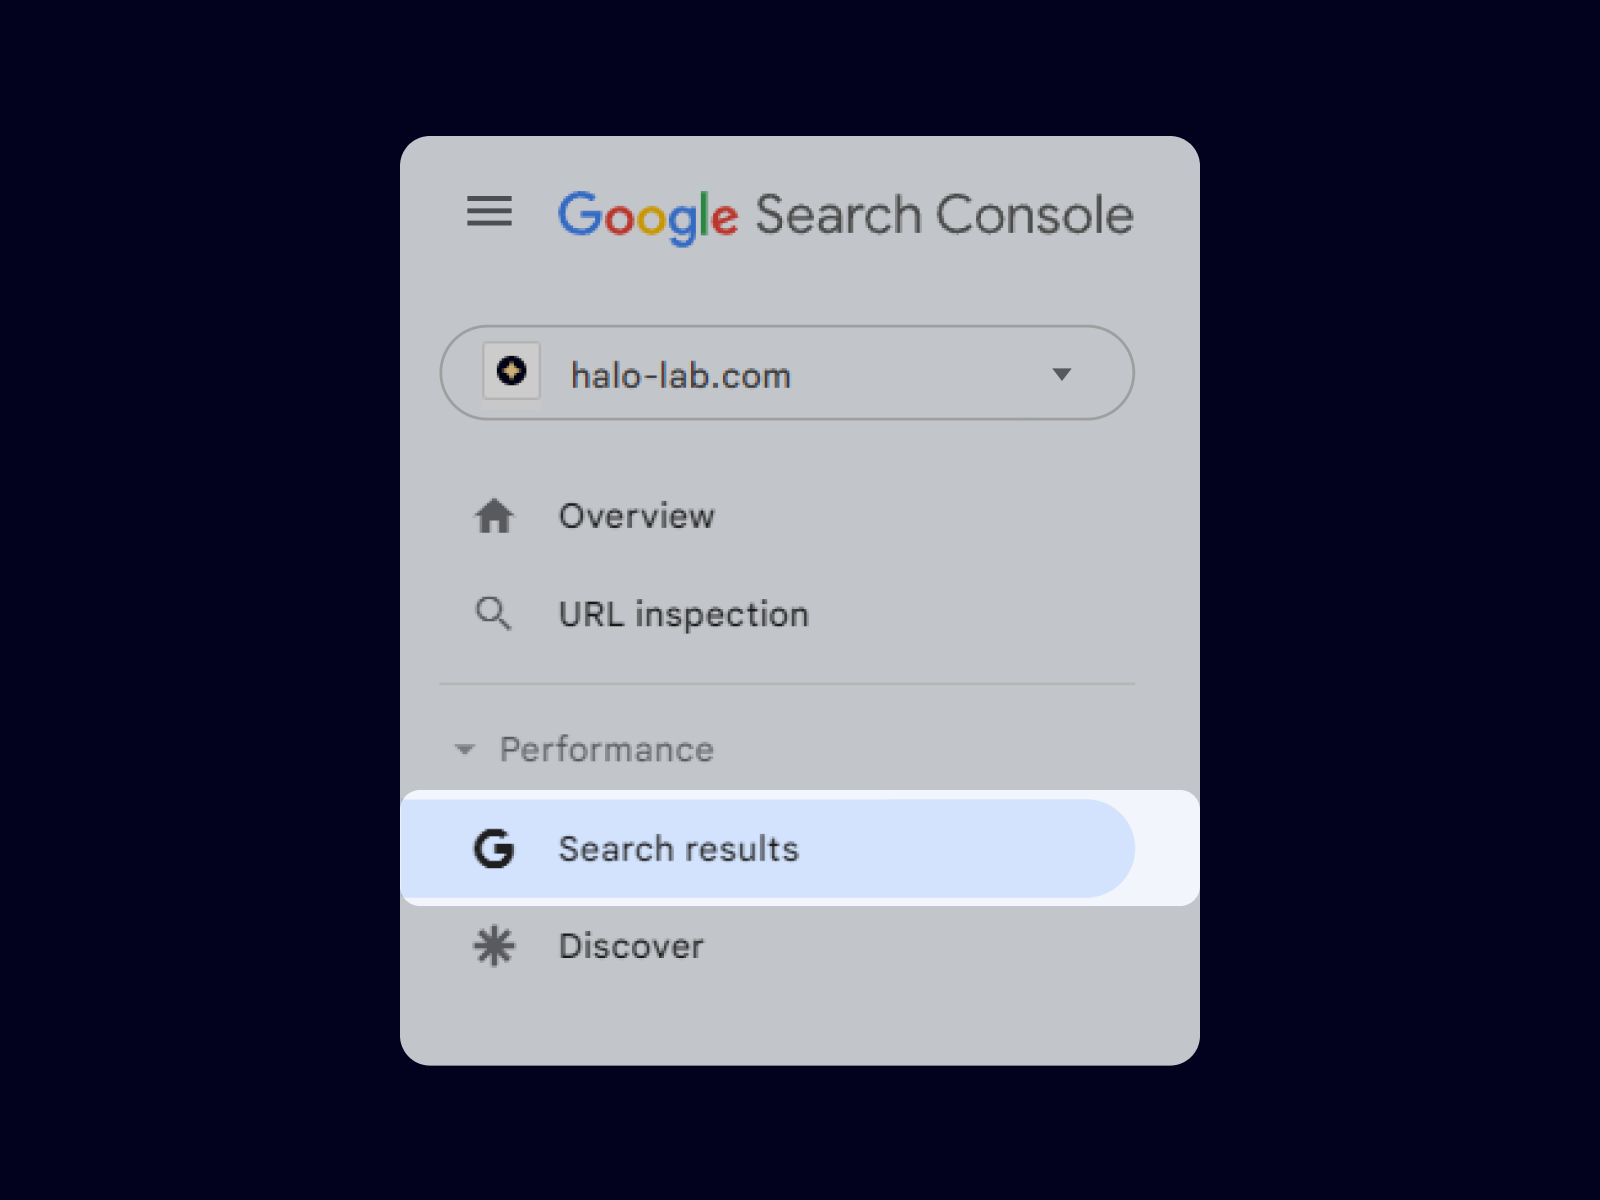 “Performance” section shows how your website performs in search results